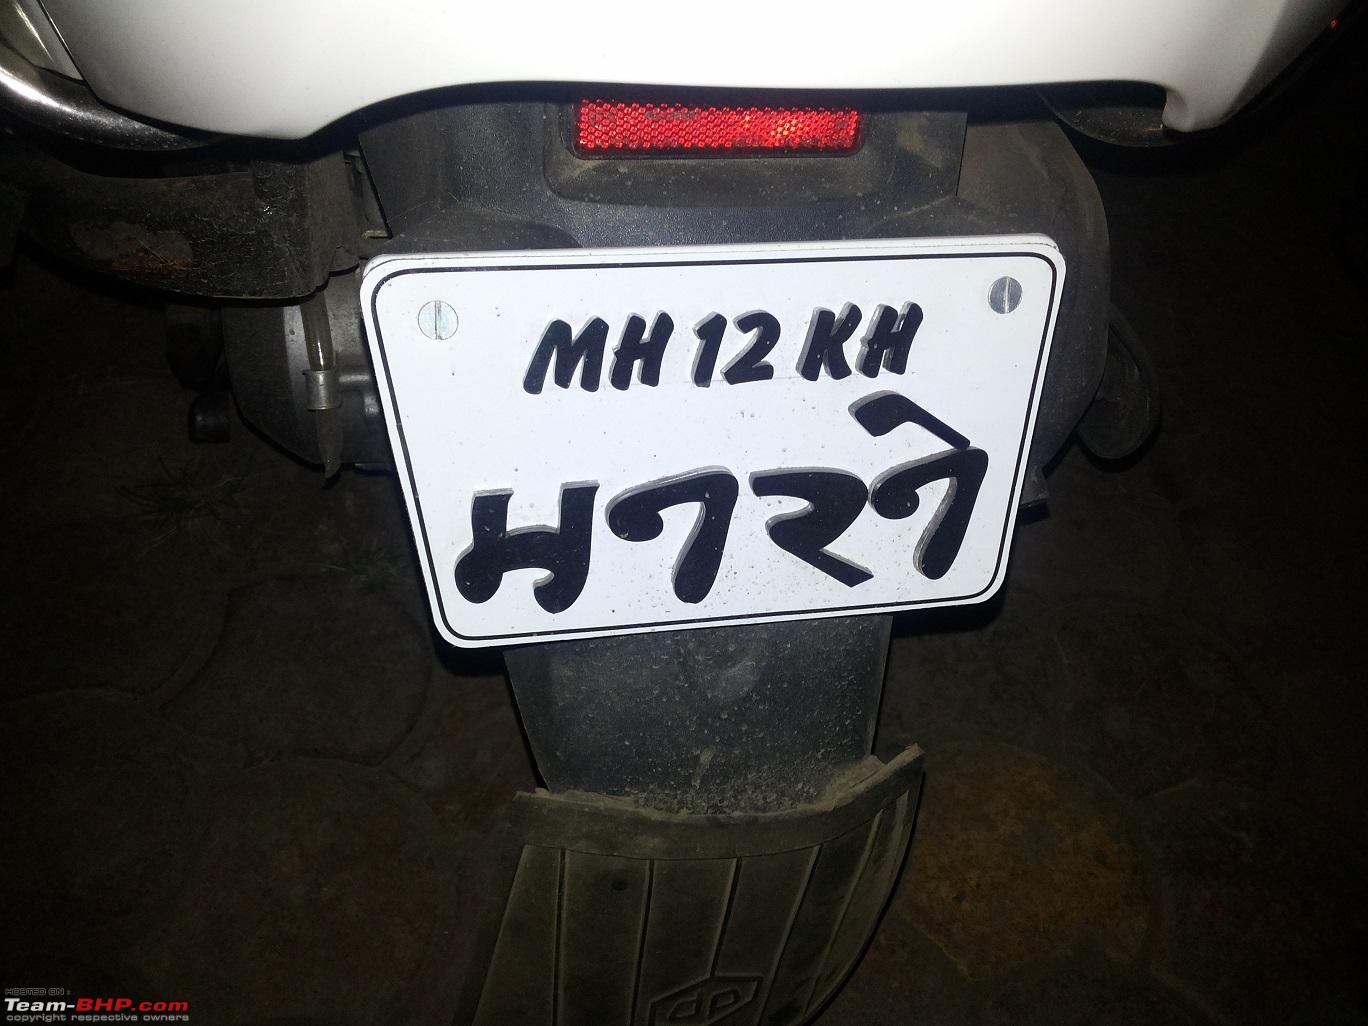 Team-Bhp - Take A Look At This Number Plate!